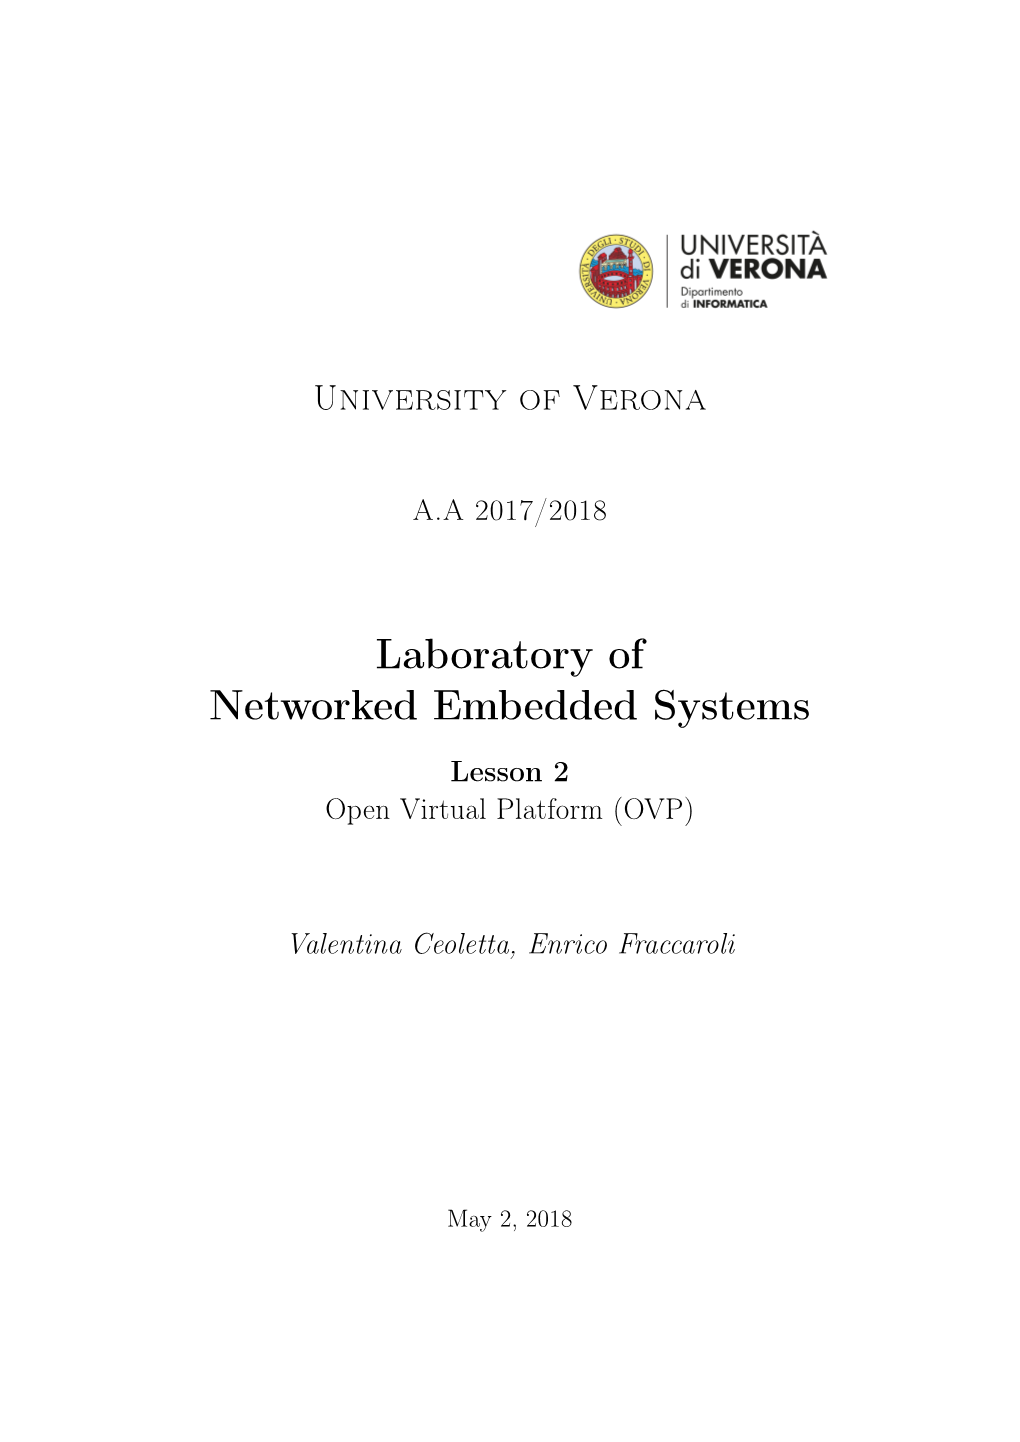 Laboratory of Networked Embedded Systems